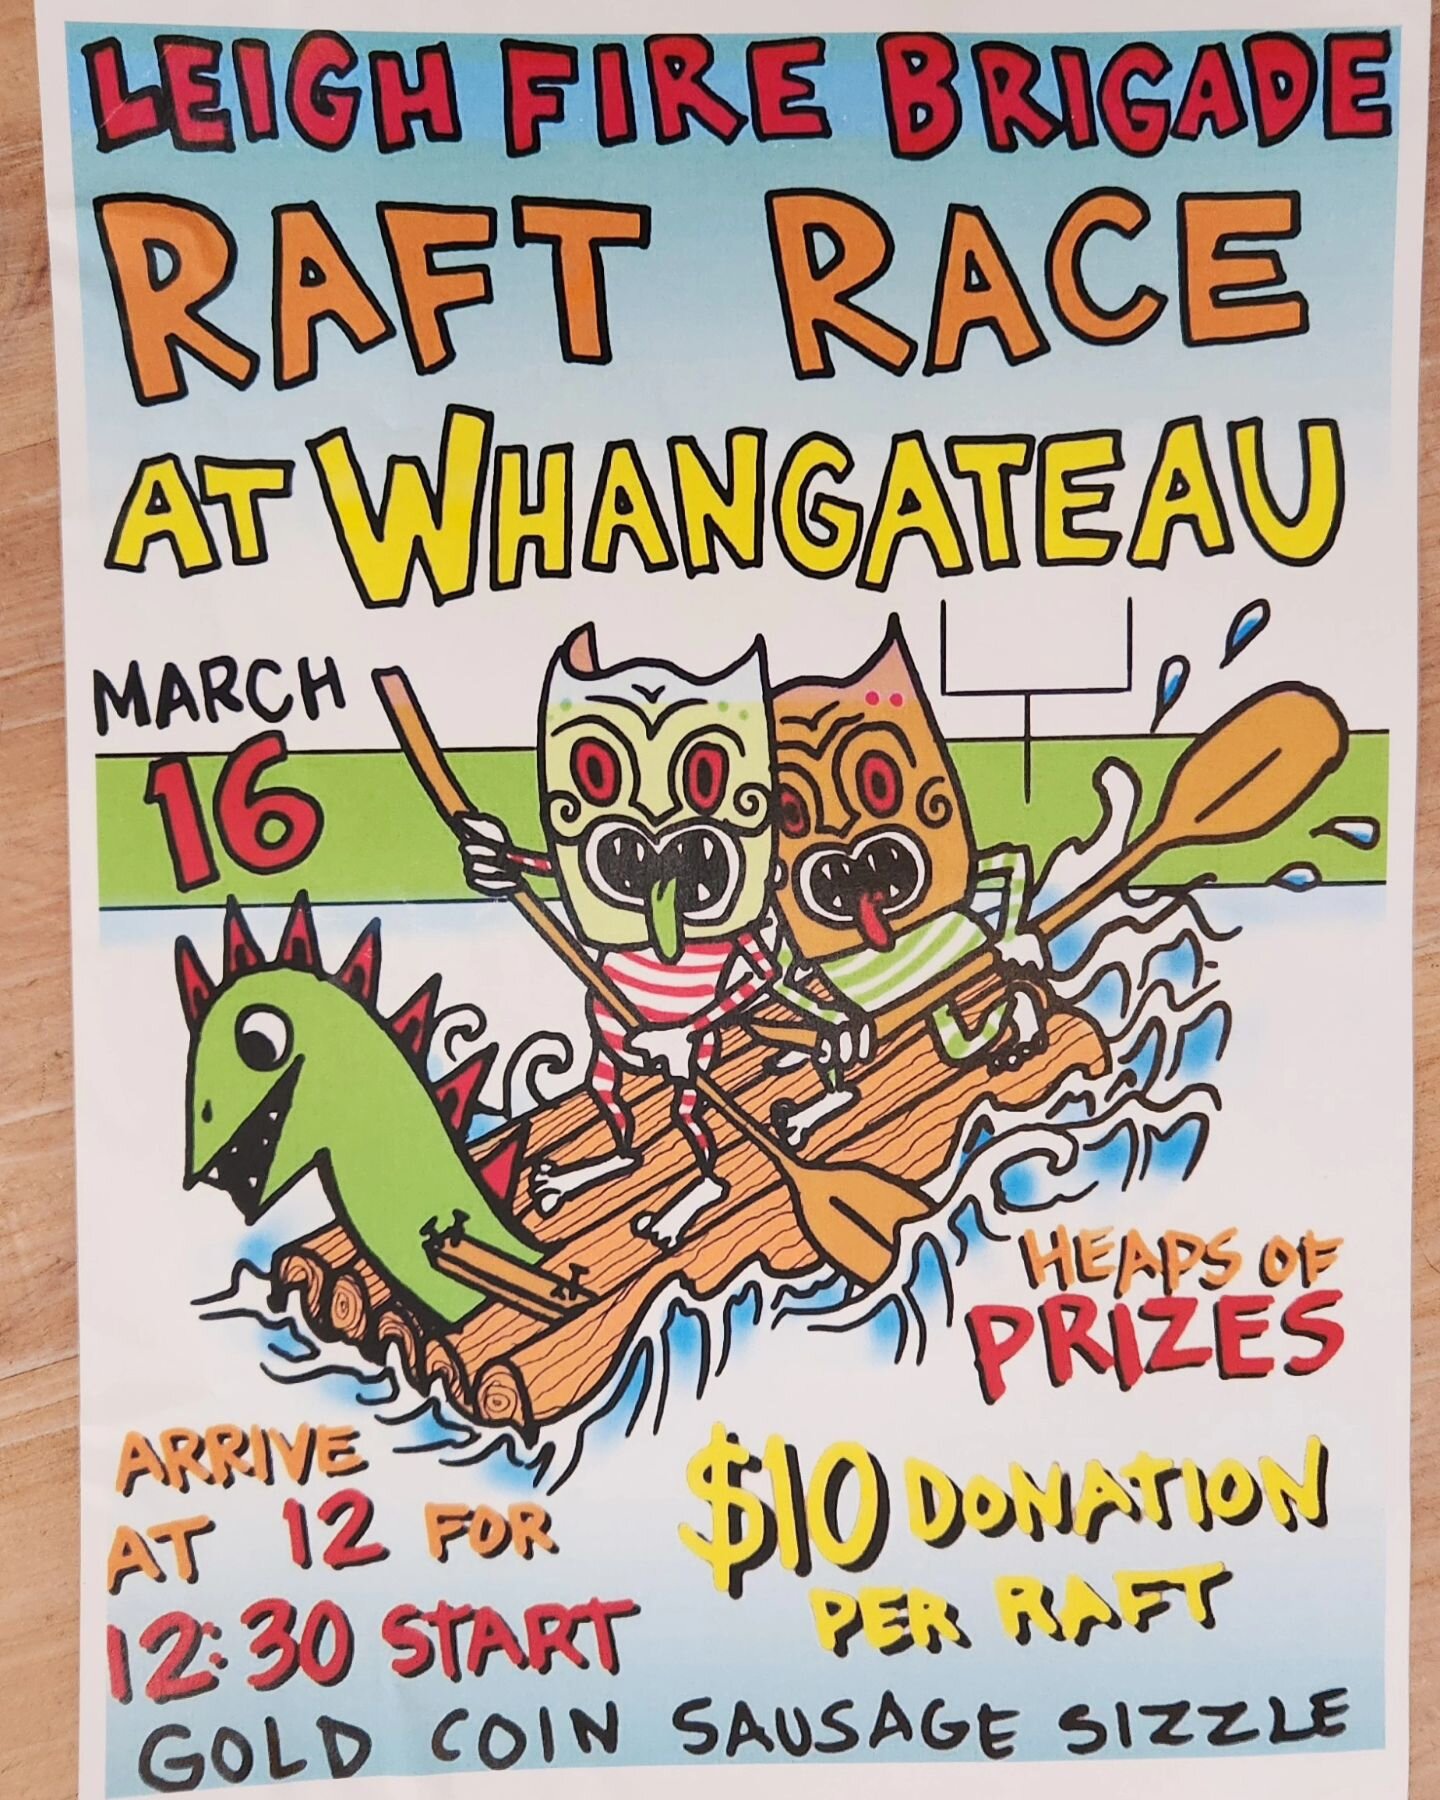 Leigh Fire Brigade Raft Race is on this weekend 🙌 
🛶 March 16th @ Whangateau 
🛟 12pm.. 12.30 start. 
⛵️ $10 per raft entry
🚤 Gold coin sausage sizzle

Prizes galore, including some goodies from us, come down and support our local crew who do an i